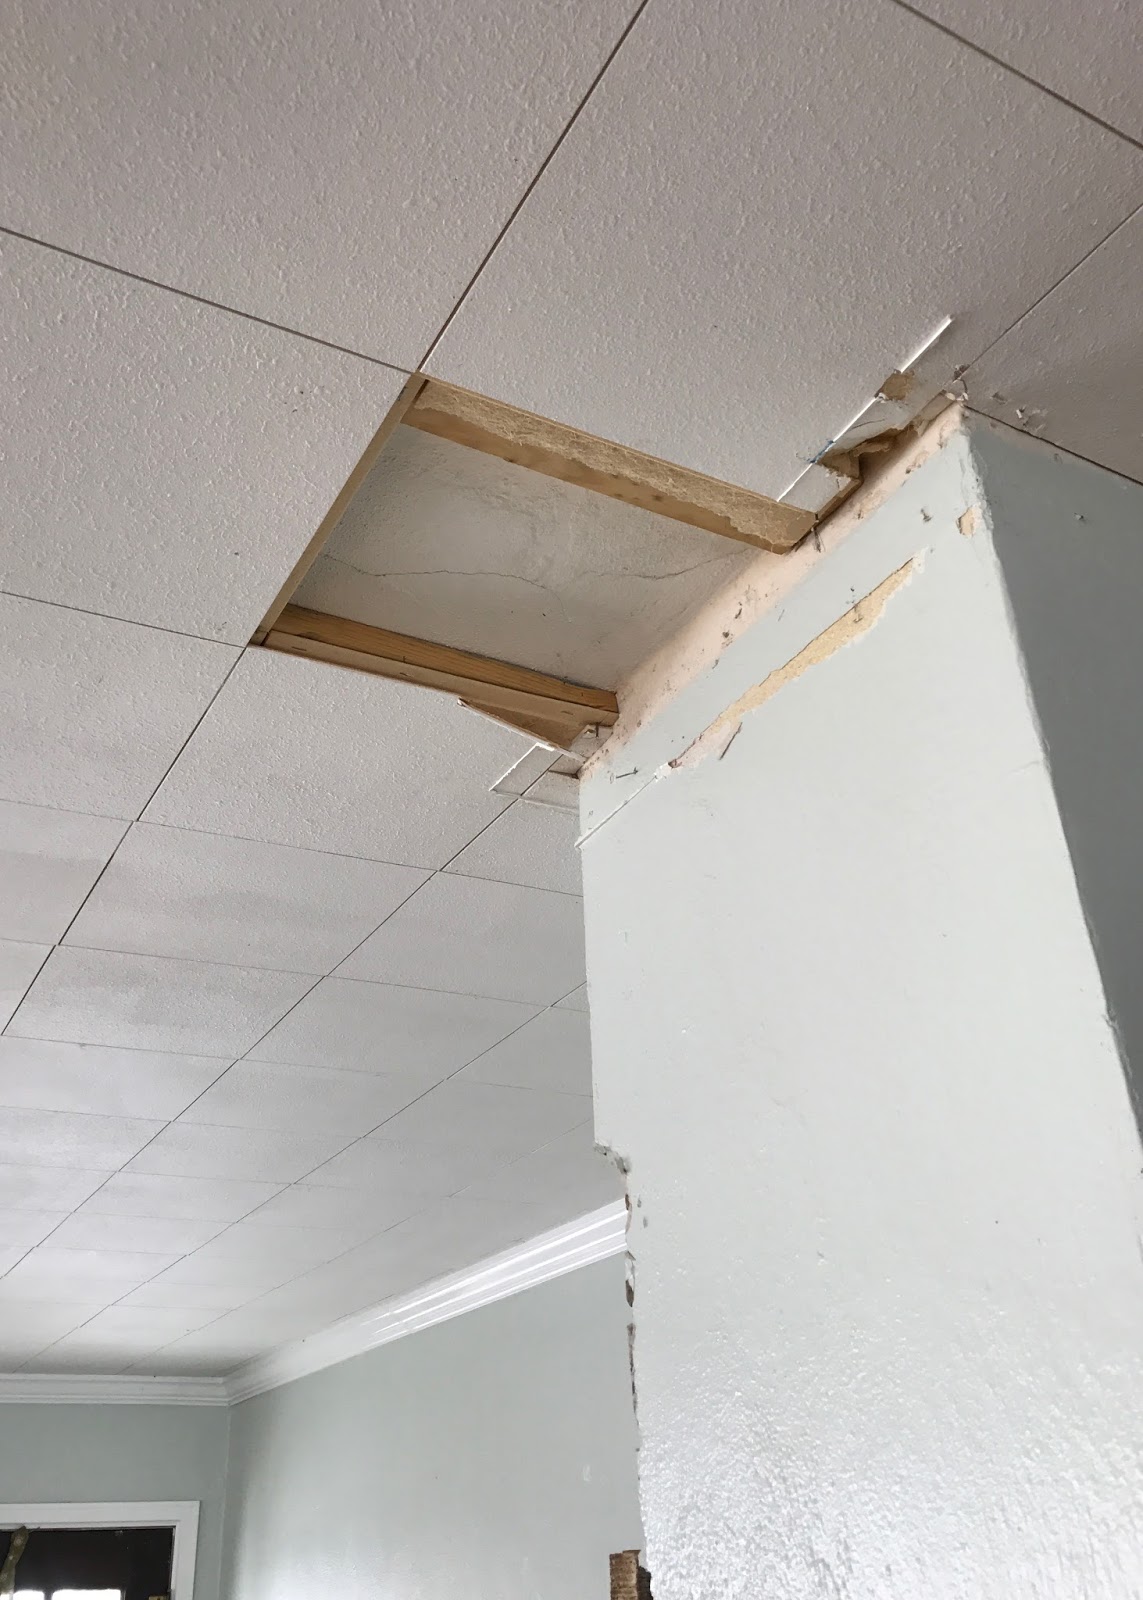 Farmhouse Ceiling Removing Tiles, How To Replace A 12 215 Ceiling Tiles